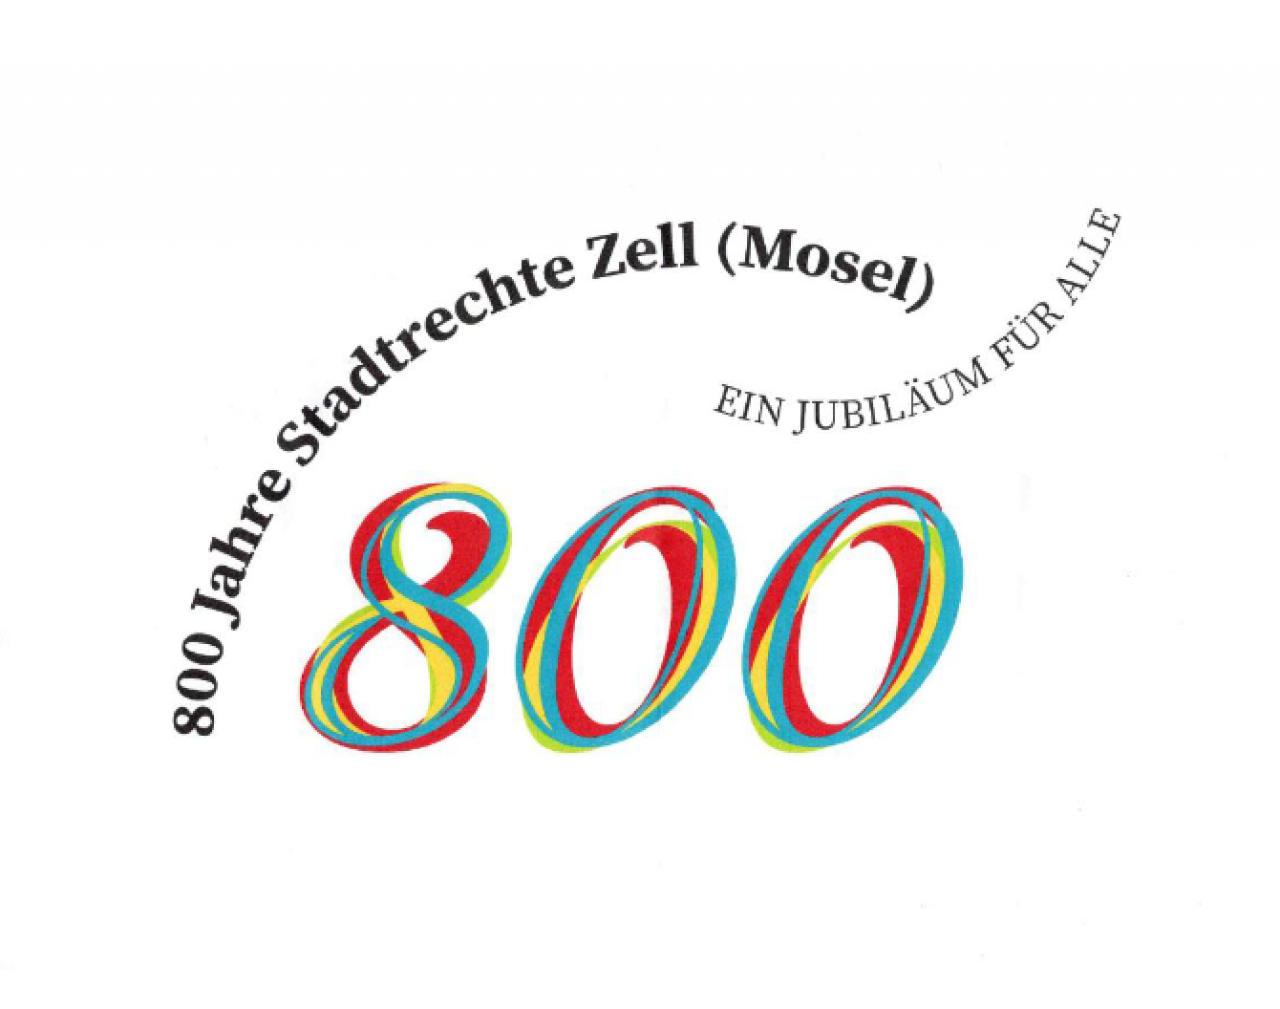 Logo 800 Jahre Zell Mosel.